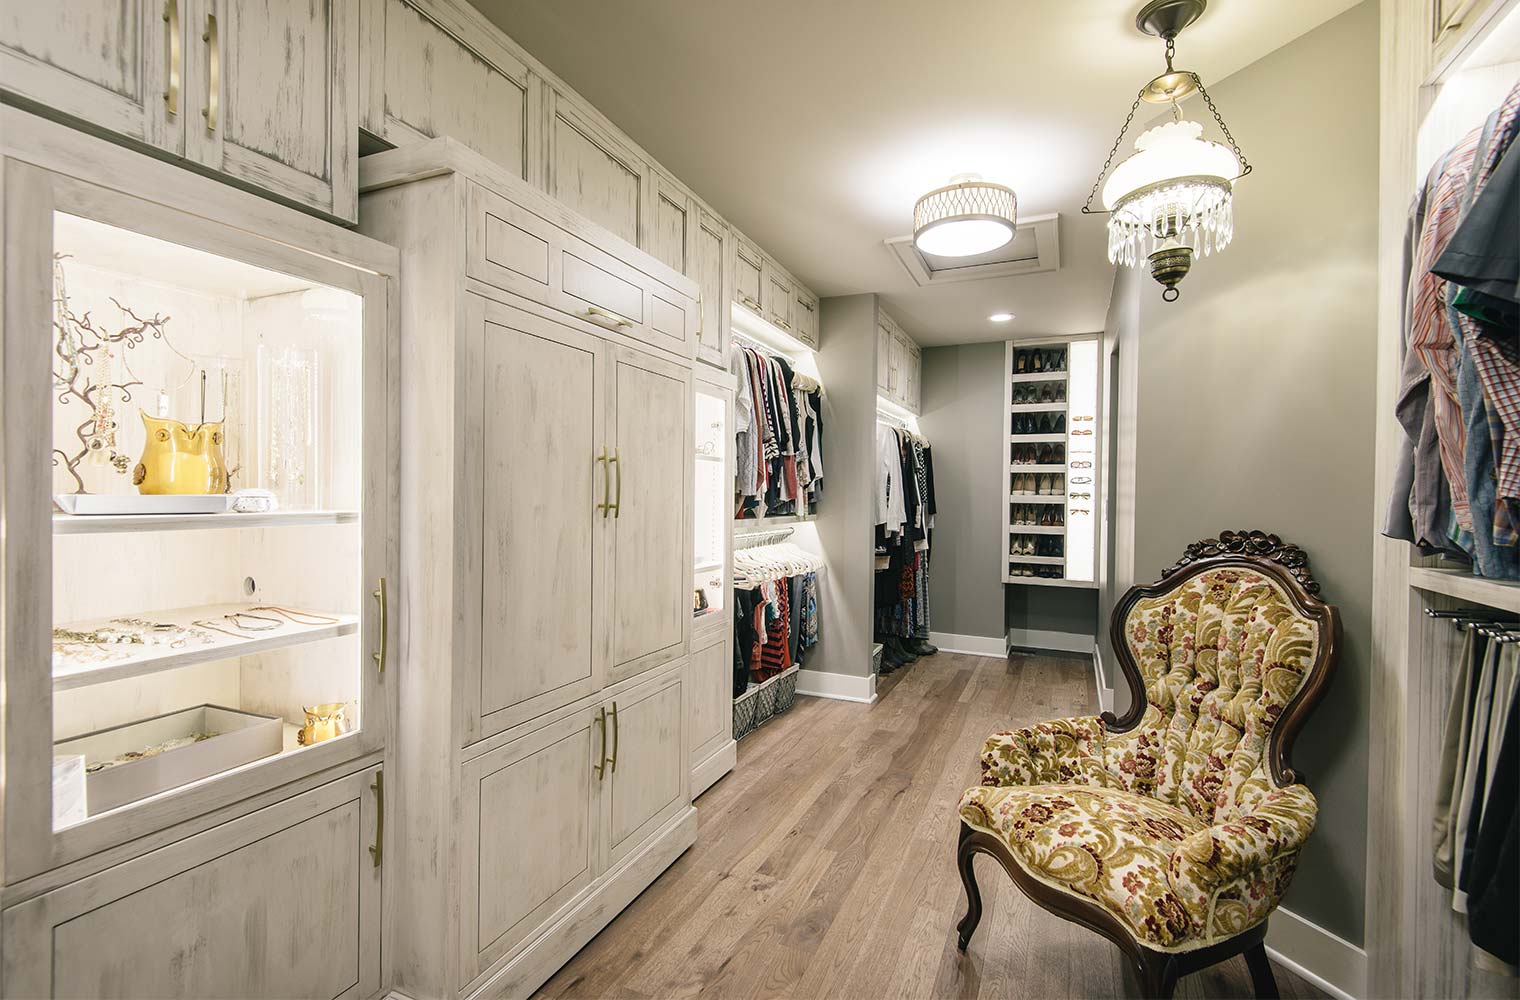 his and hers walk-in closet features lighted jewelry display case, custom cabinets, lighted shoe storage and sunglass display case by designer and remodeler Silent Rivers of Des Moines, Iowa